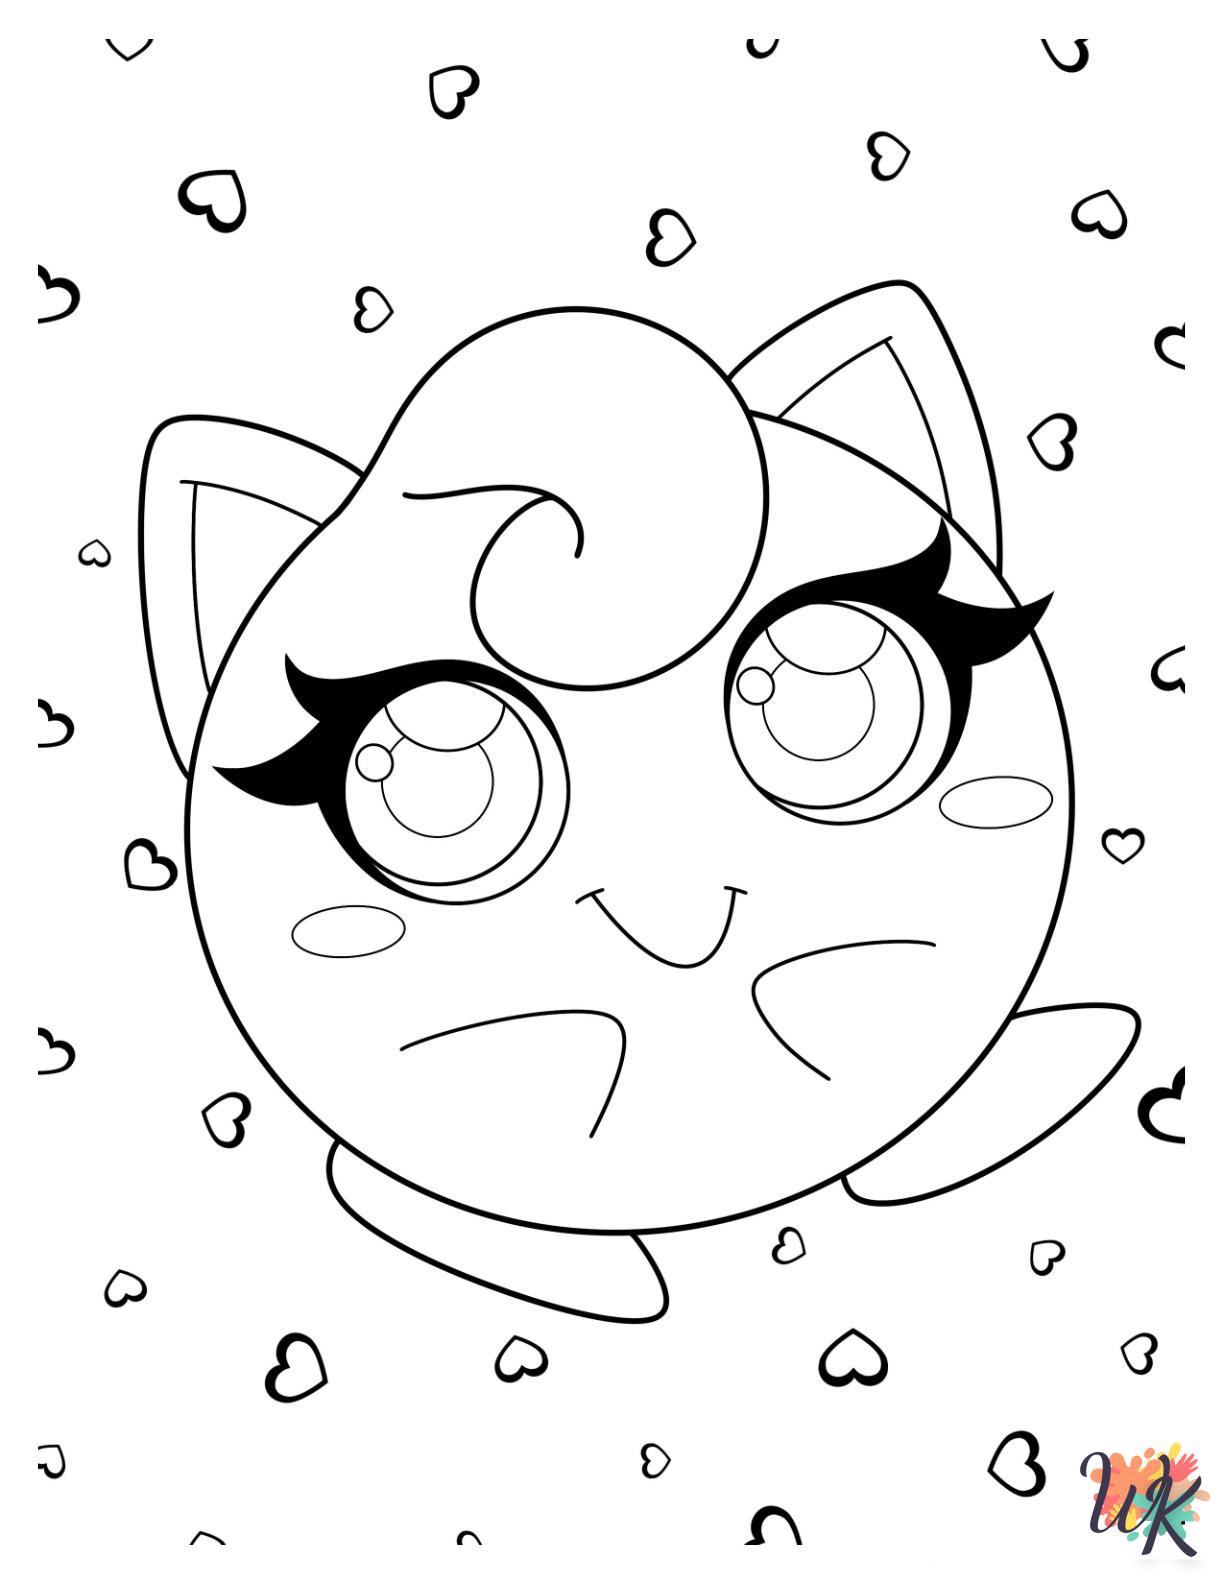 Jigglypuff coloring pages free